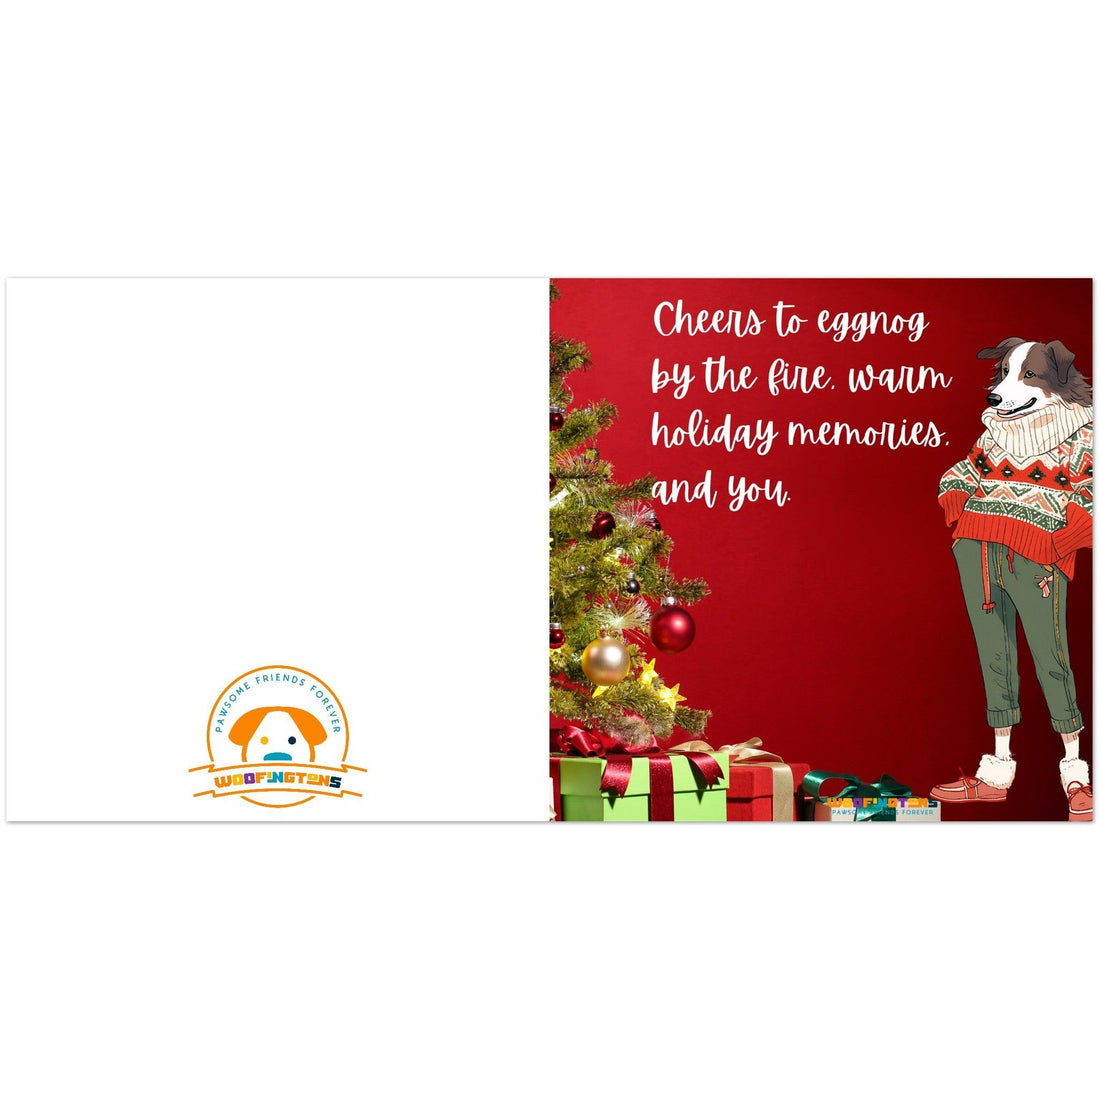 &quot;Cheers to eggnog by the fire, warm holiday memories, and you.&quot; - Whimsical Winter Dog Christmas Card - Pack of 10 Greeting Cards (premium envelopes) - Woofingtons